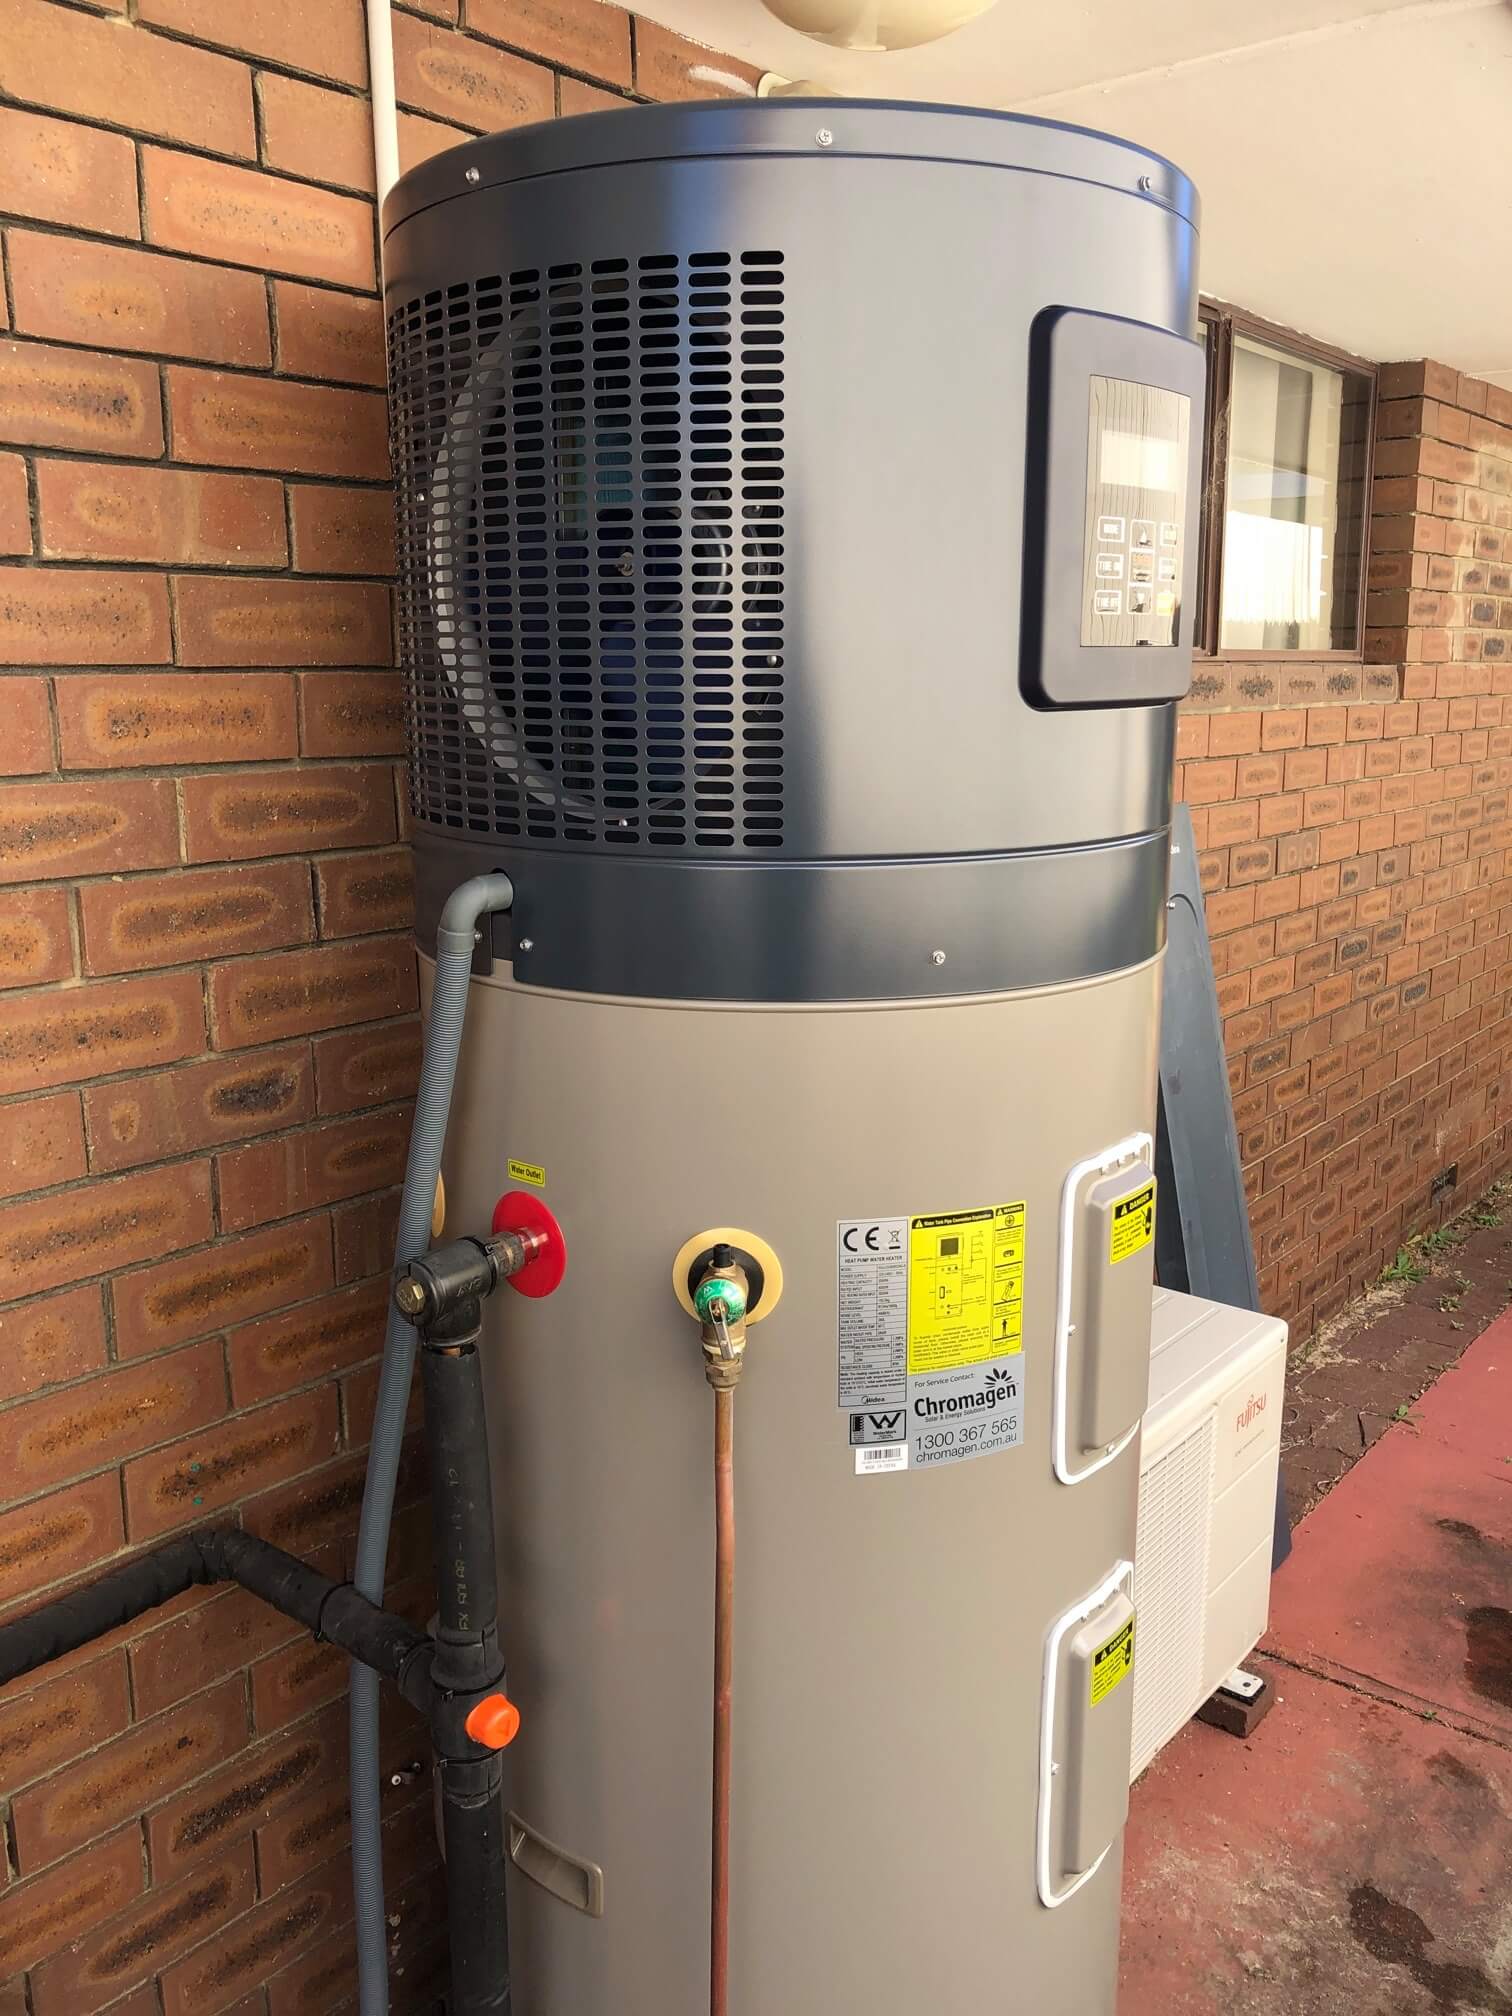 heat-pump-hot-water-system-prices-from-33-govt-rebates-anytime-hot-water